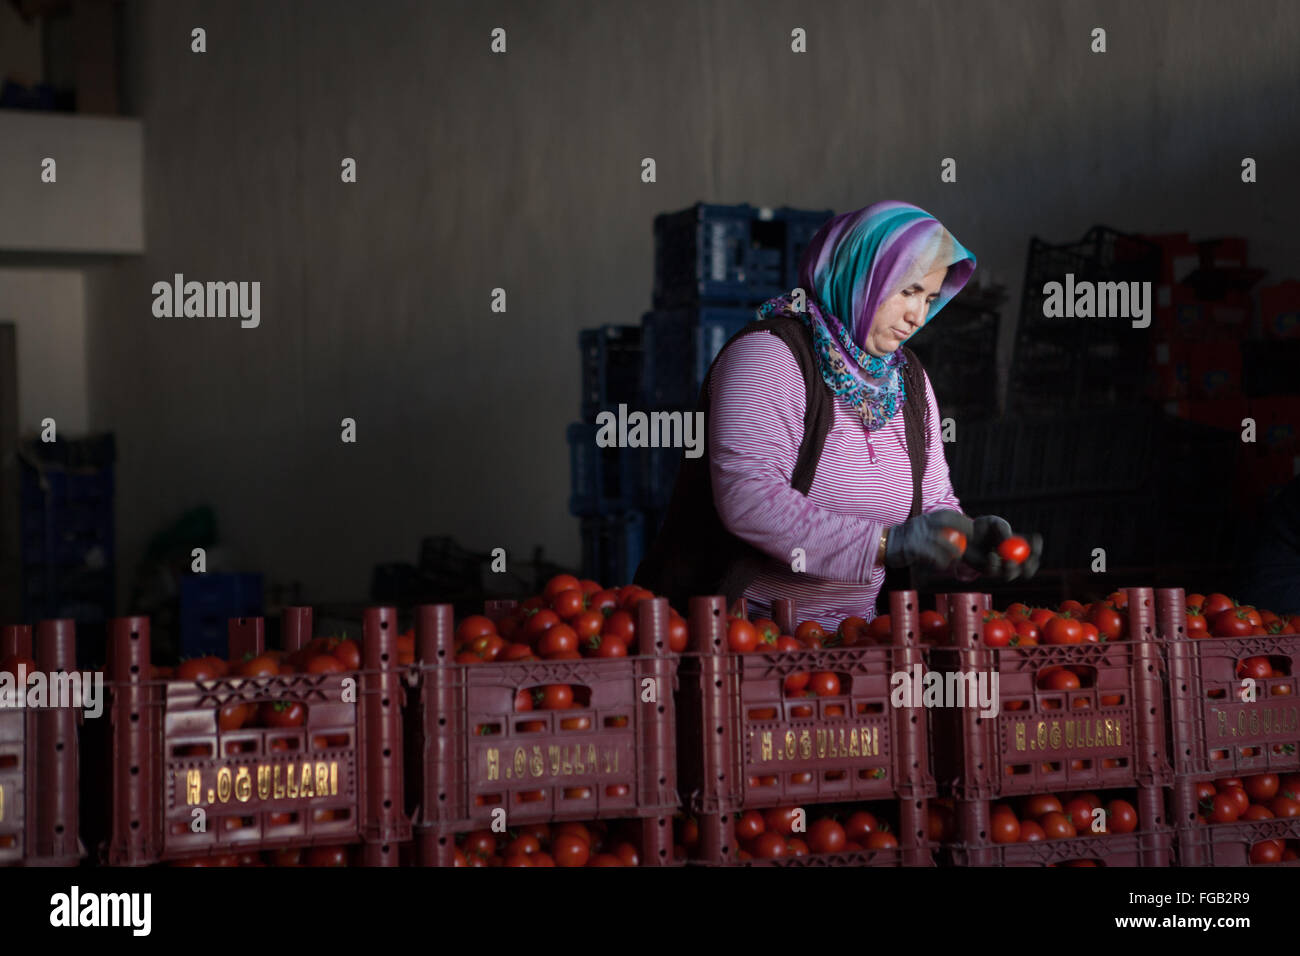 A woman sorts and grades crates of tomatoes, Fethiye, Turkey. Stock Photo